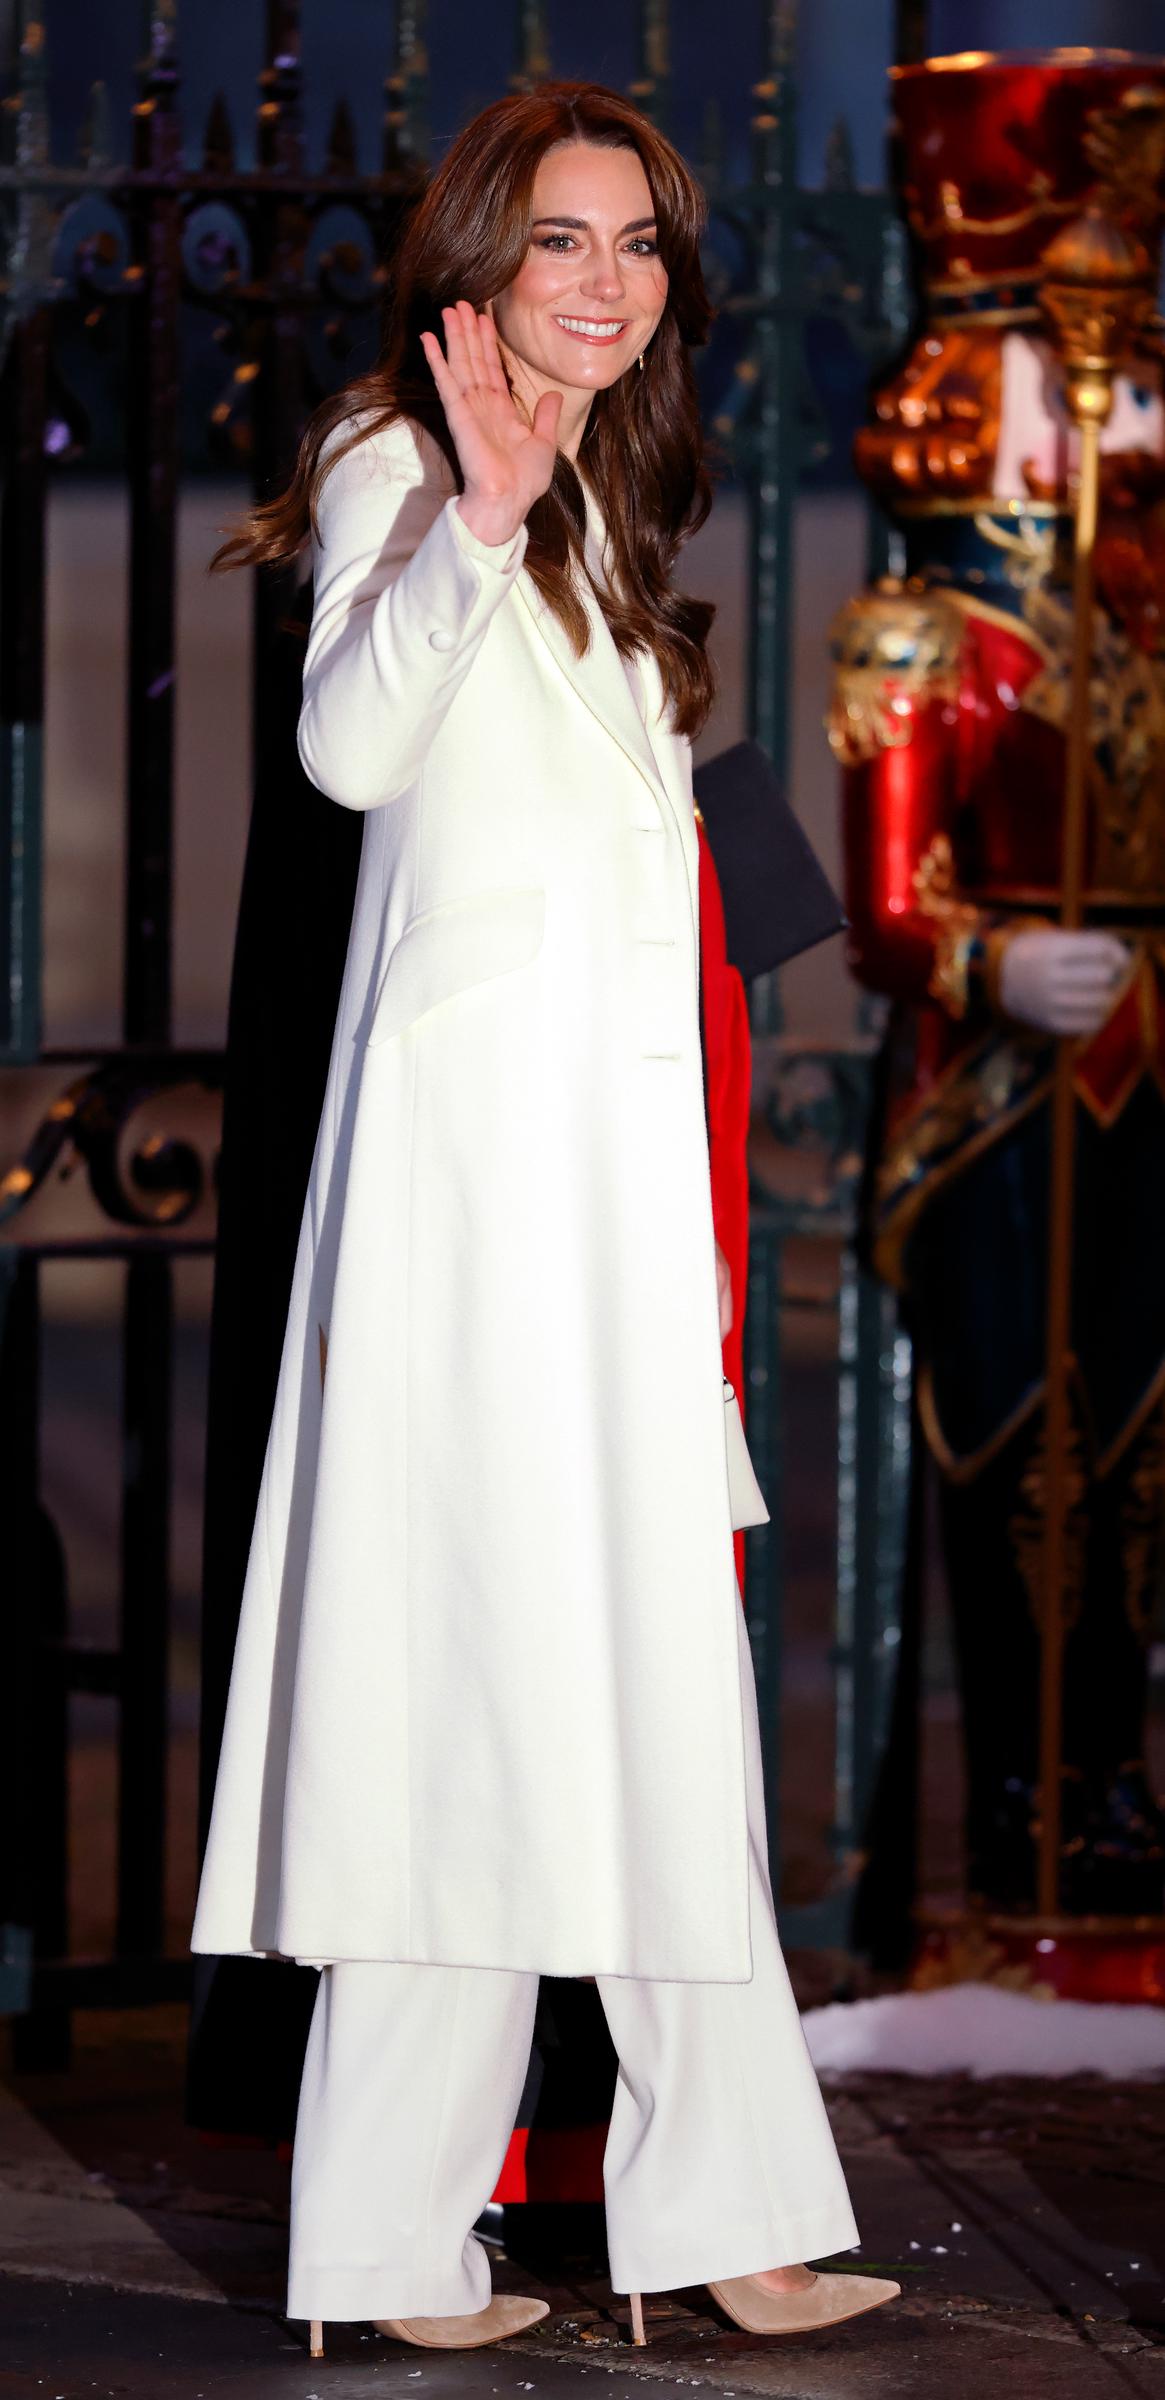 Prinzessin Catherine beim "Together At Christmas"-Gottesdienst in der Westminster Abbey in London, England am 8. Dezember 2023 | Quelle: Getty Images